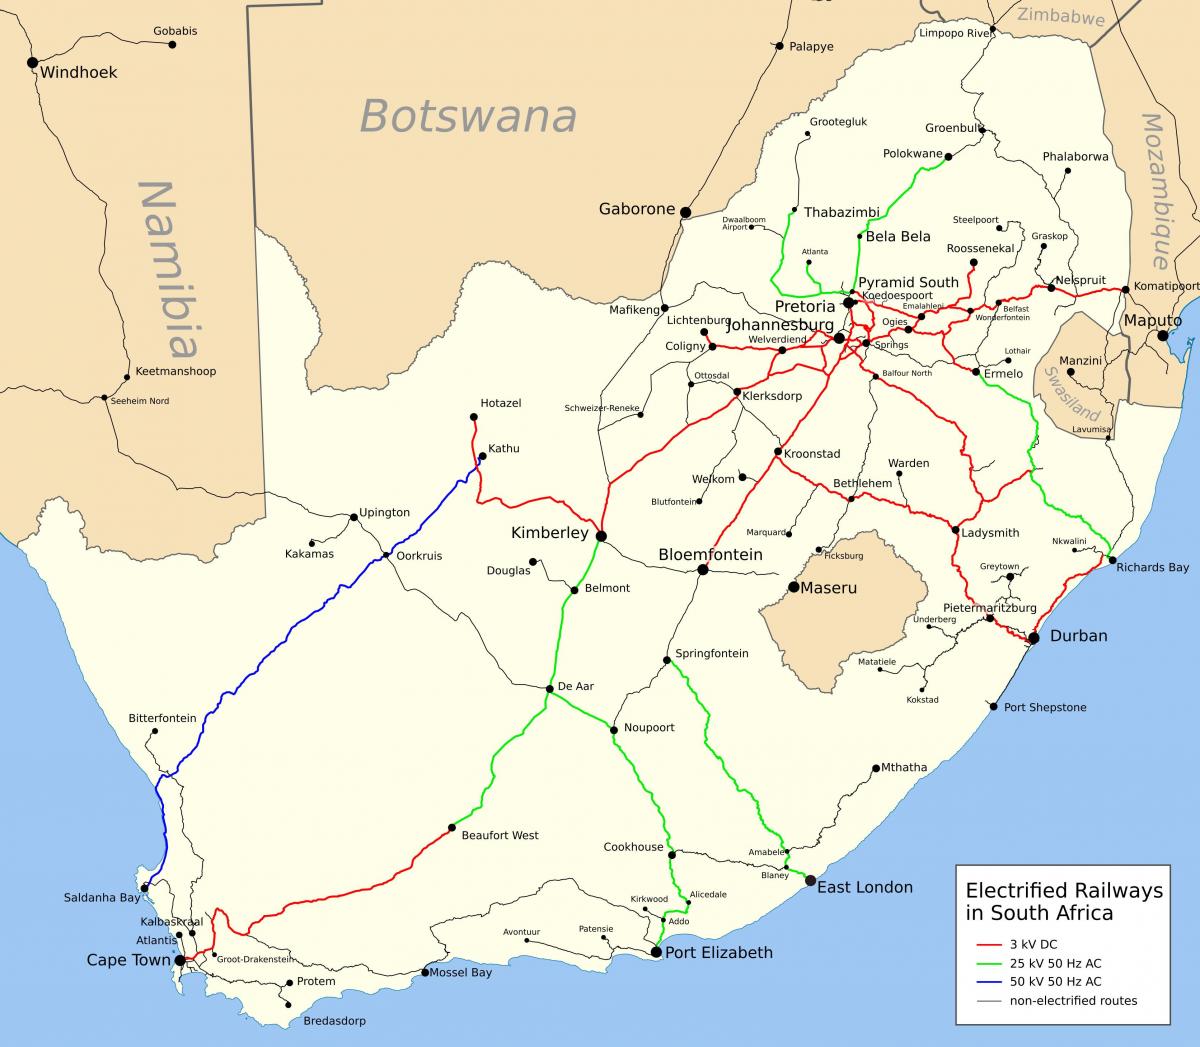 South Africa train lines map